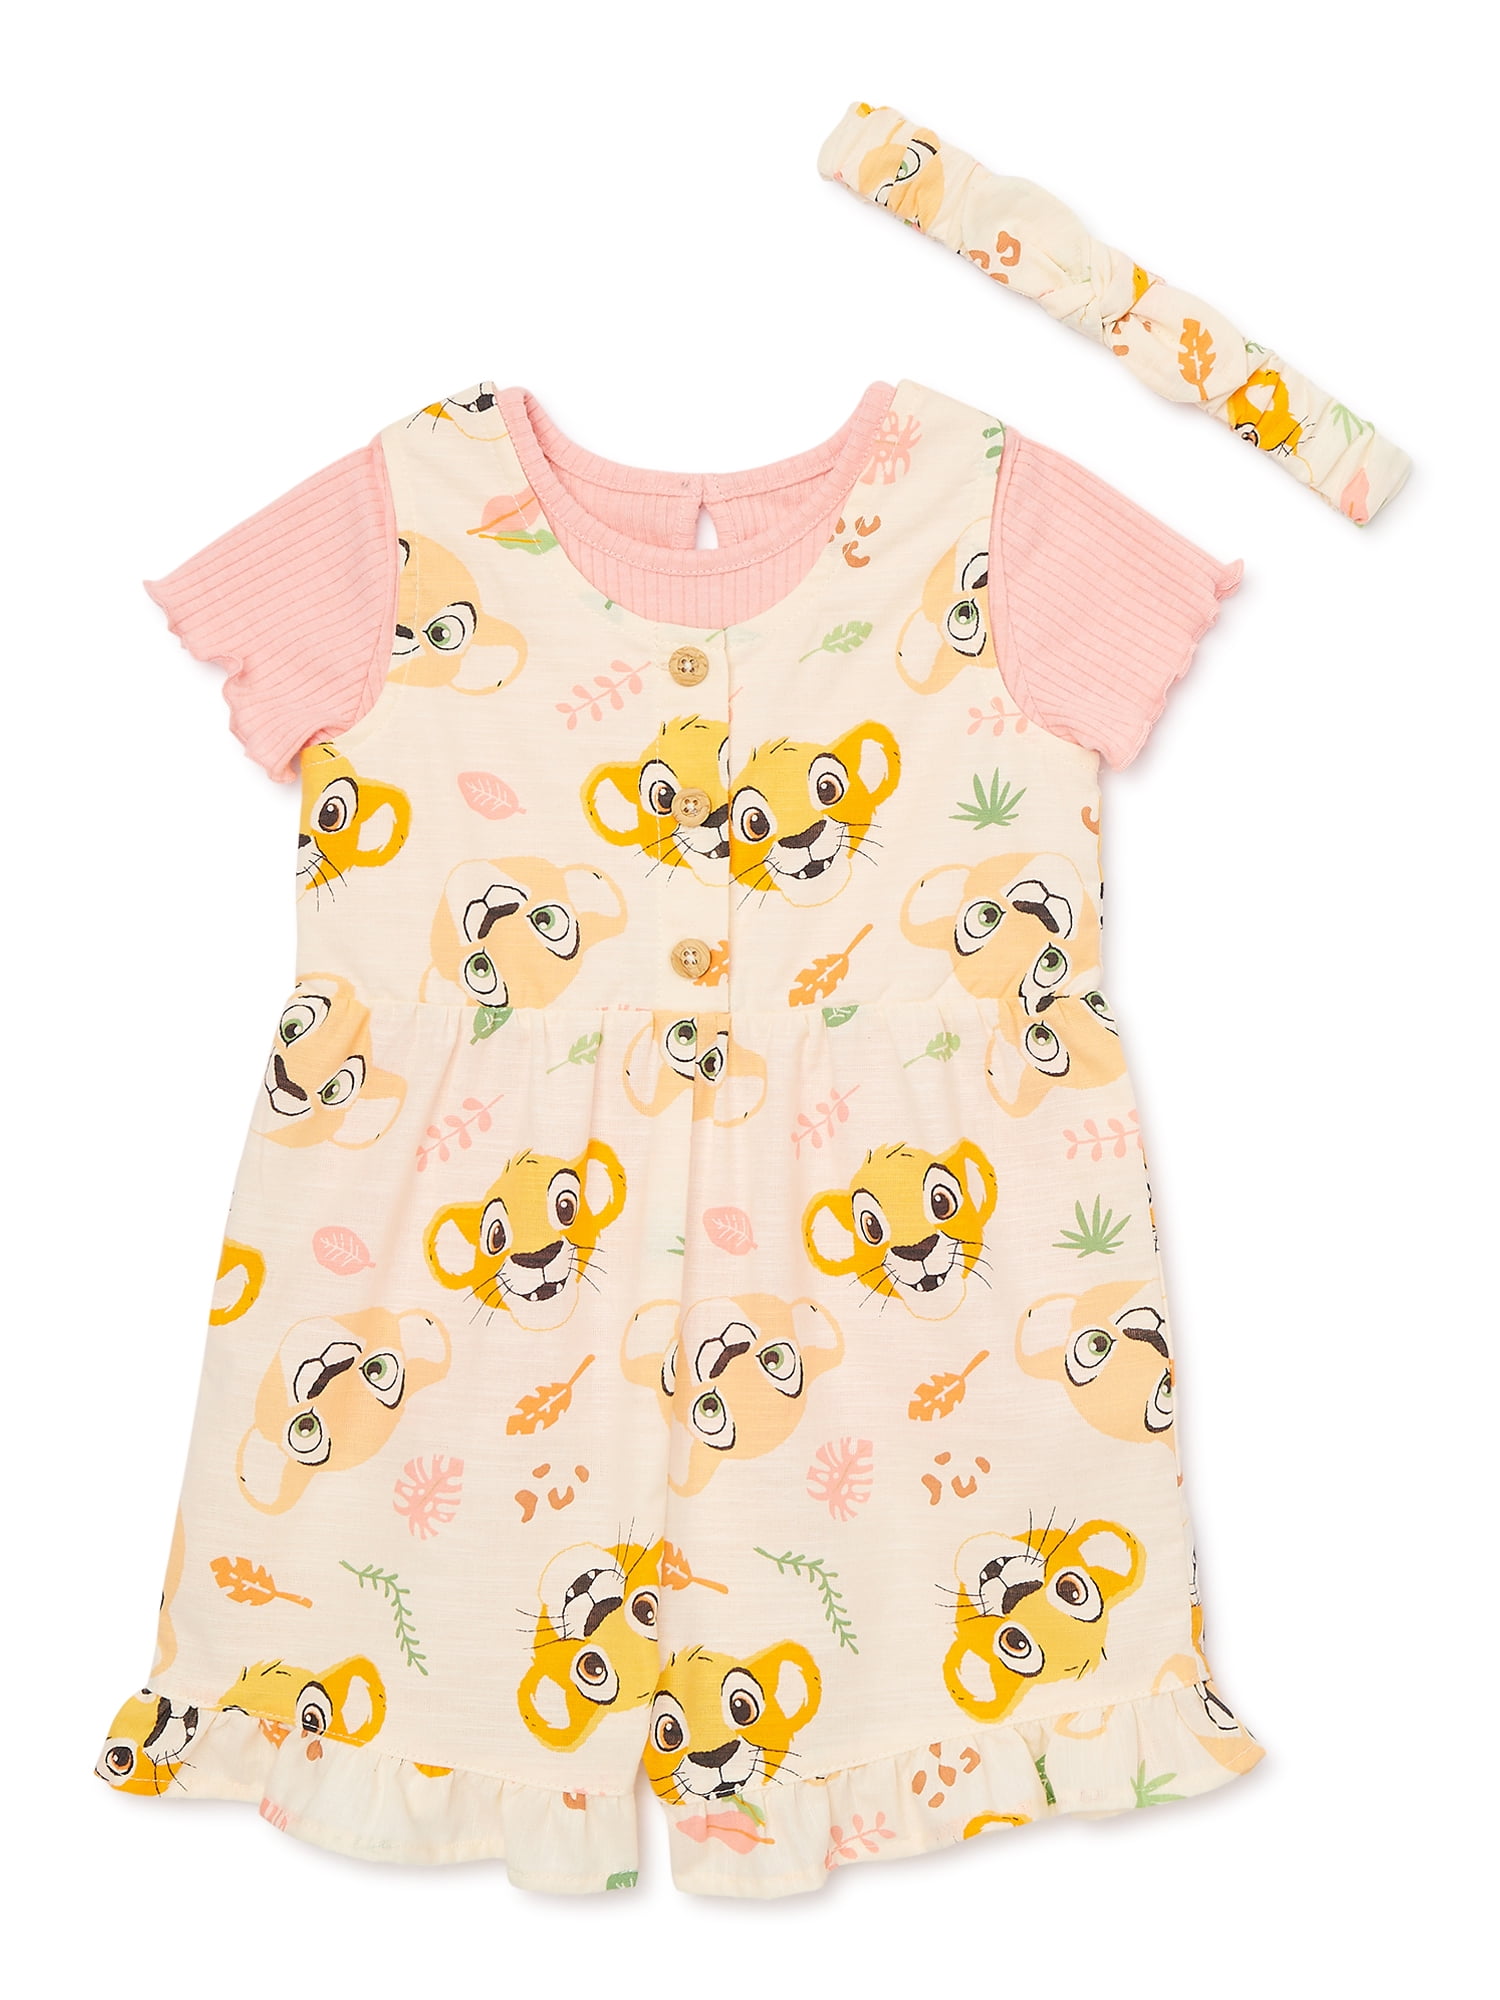 The Lion King Baby Girl Shortall and Tee Outfit Set with Headband ...